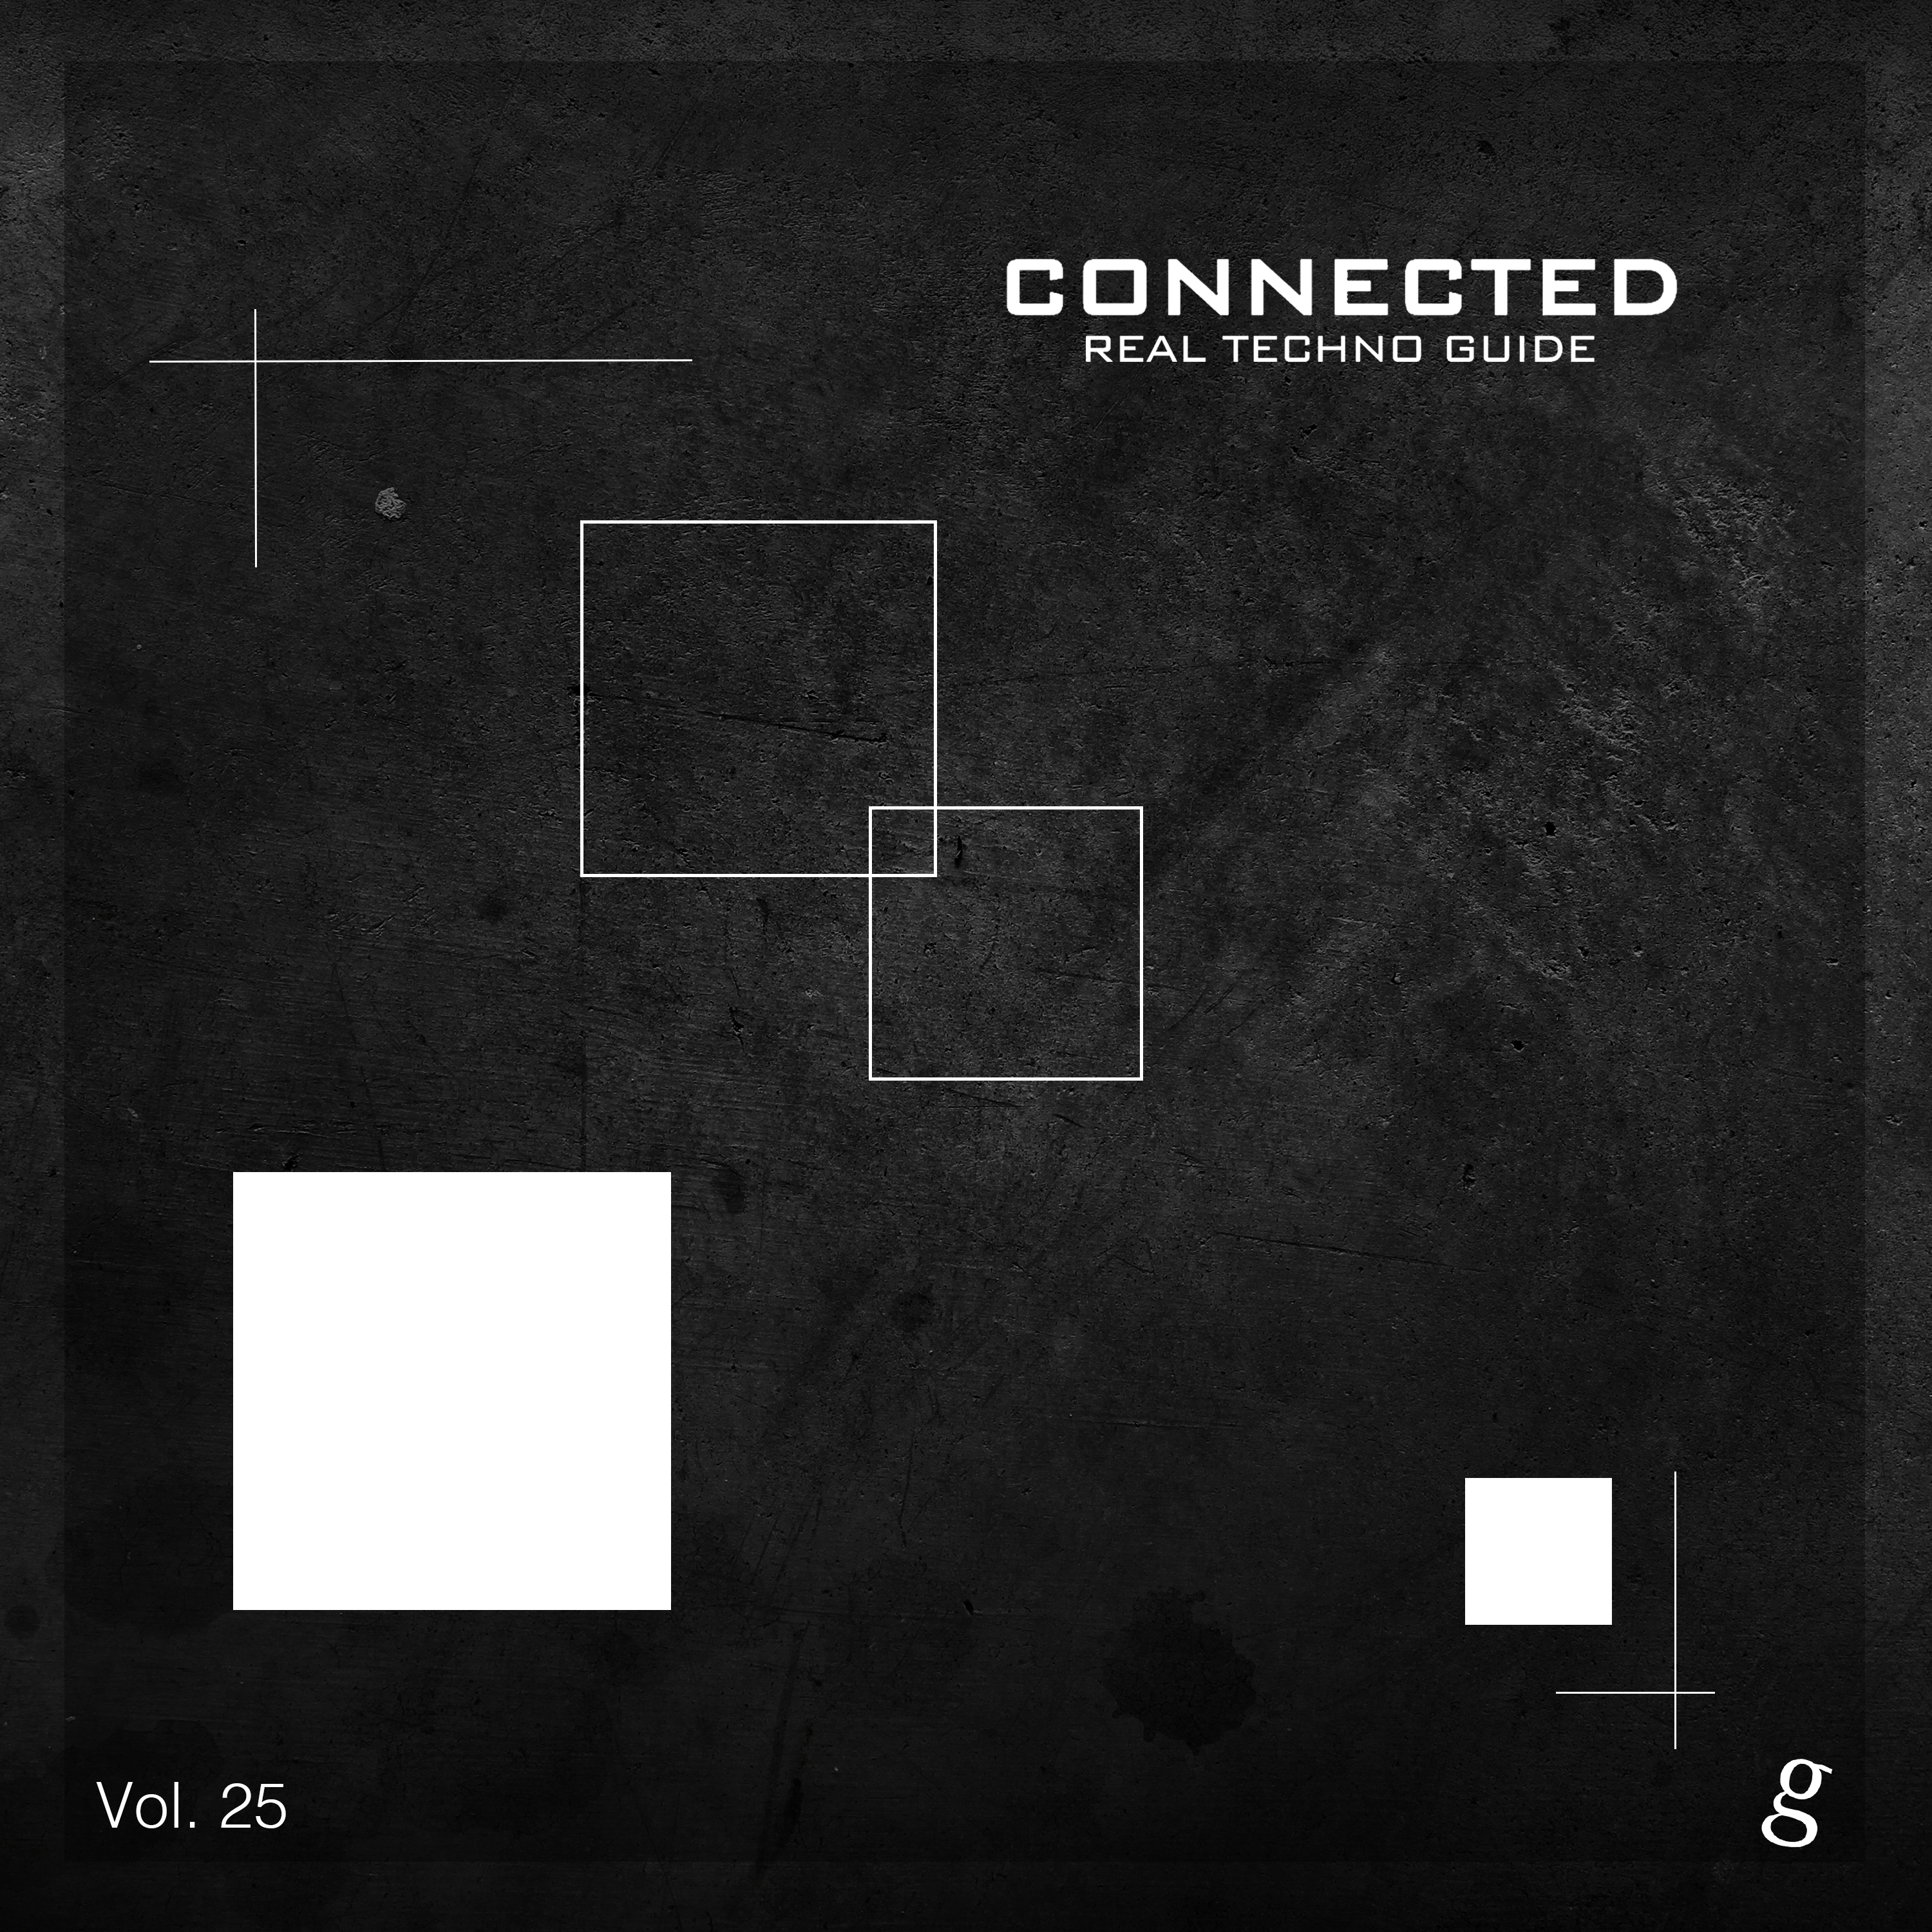 Connected, Vol. 25 - Real Techno Guide